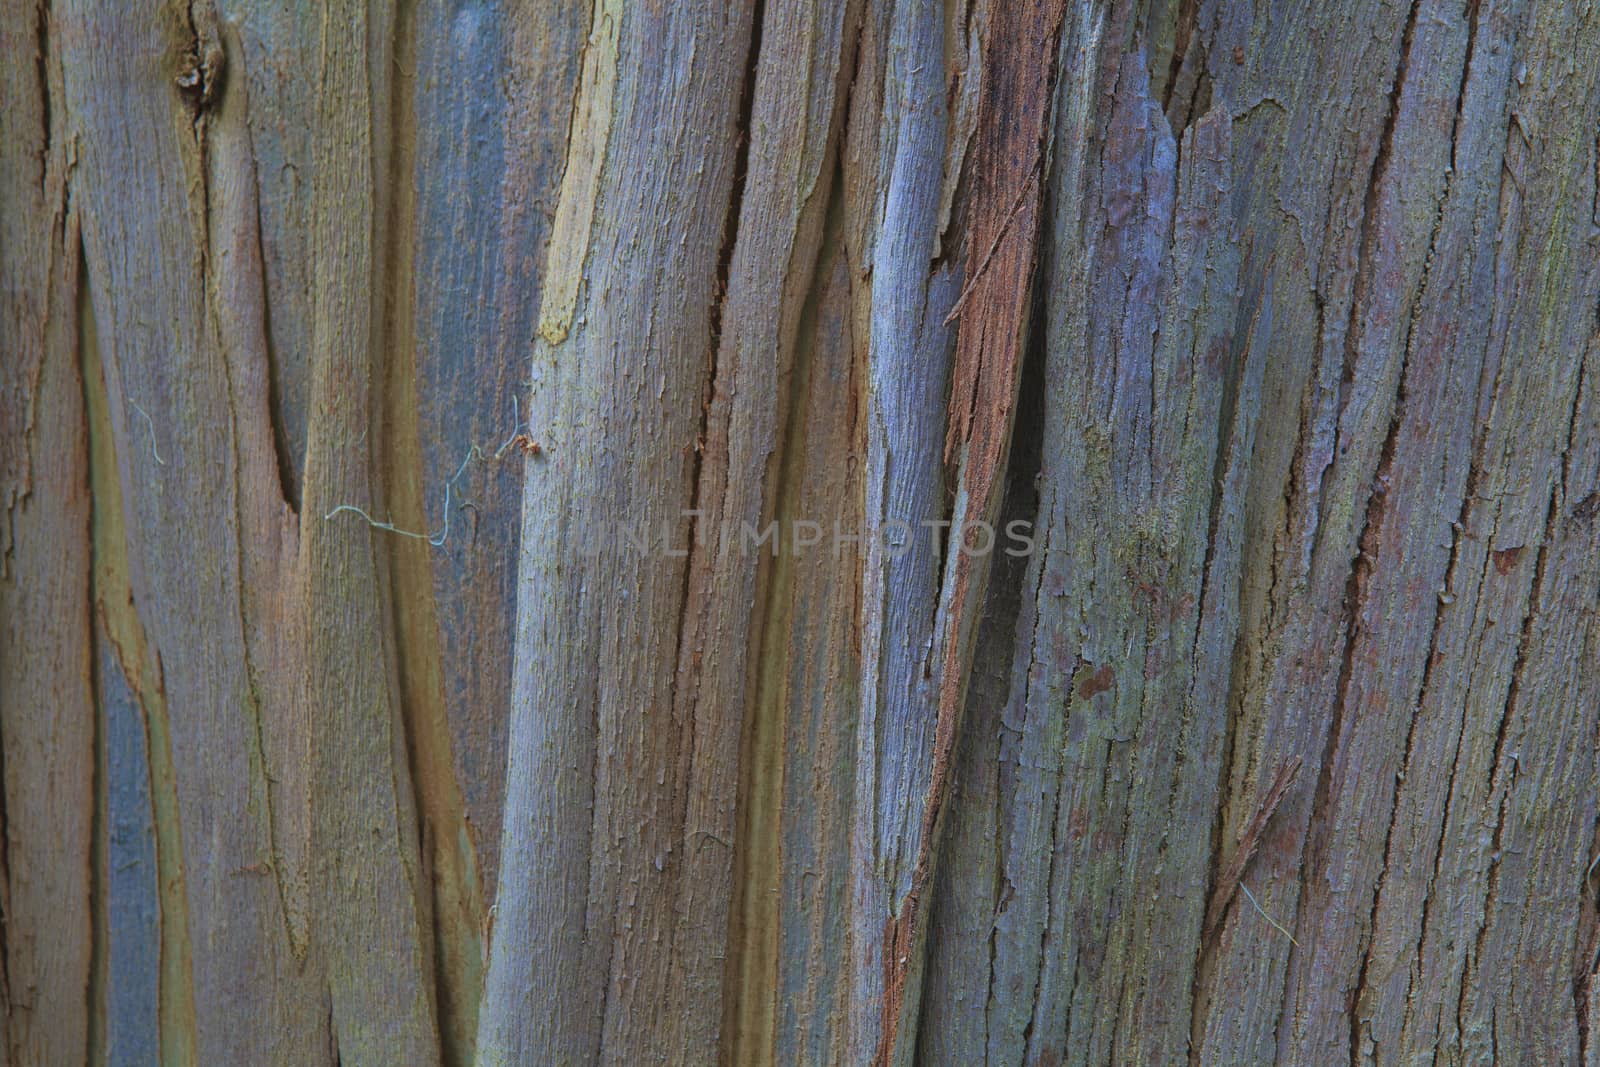 Closeup of the bark of an old tree